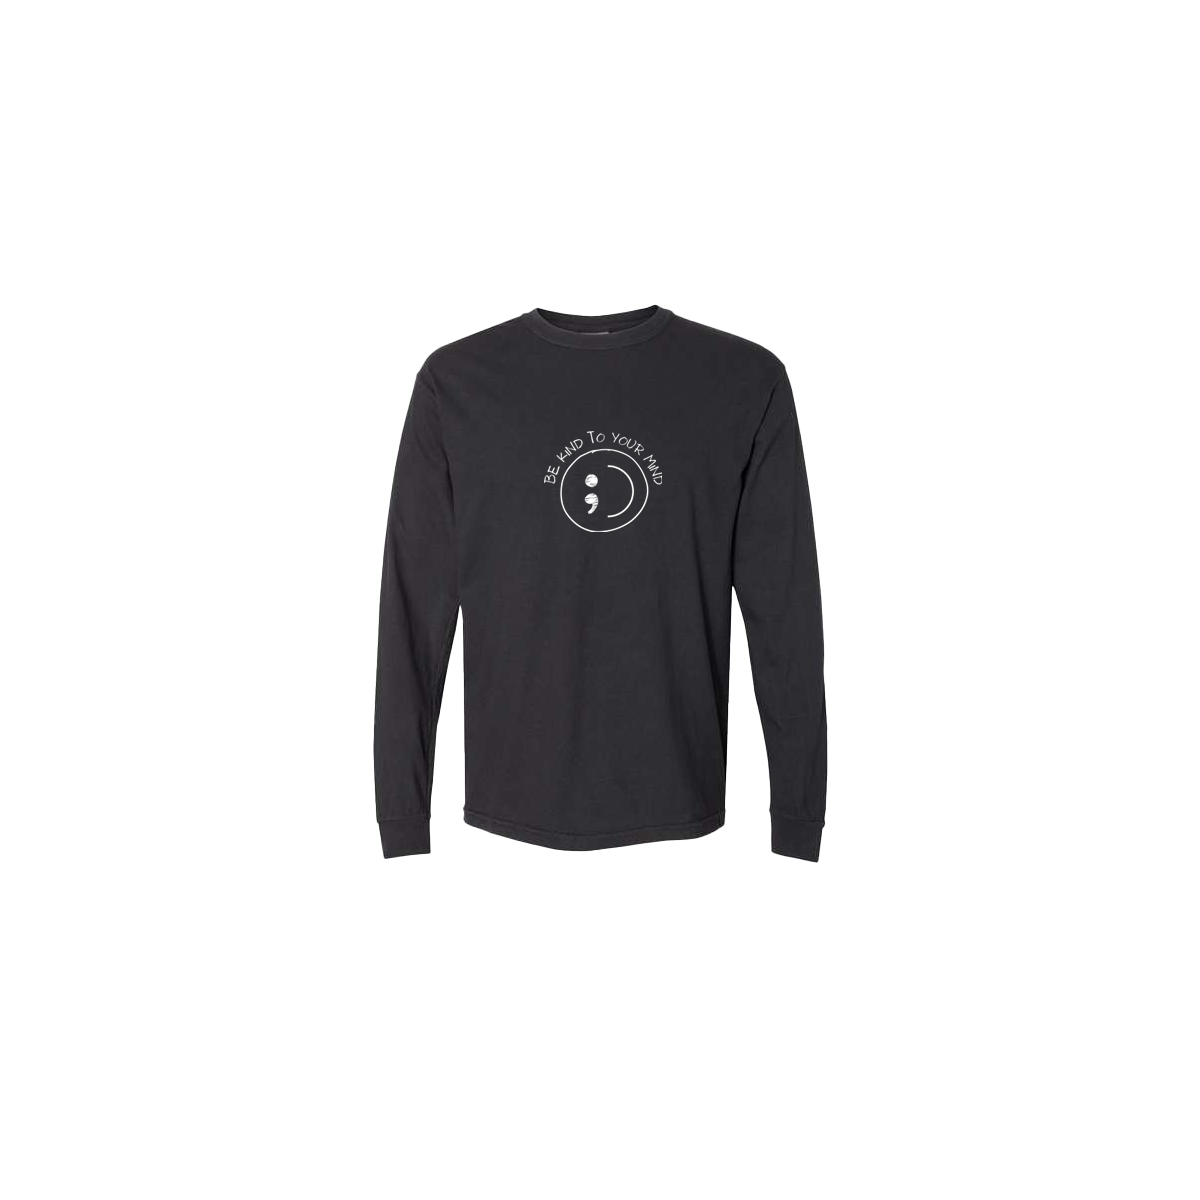 Be Kind To Your Mind Smiley Face Embroidered Black Long Sleeve Tshirt - Mental Health Awareness Clothing